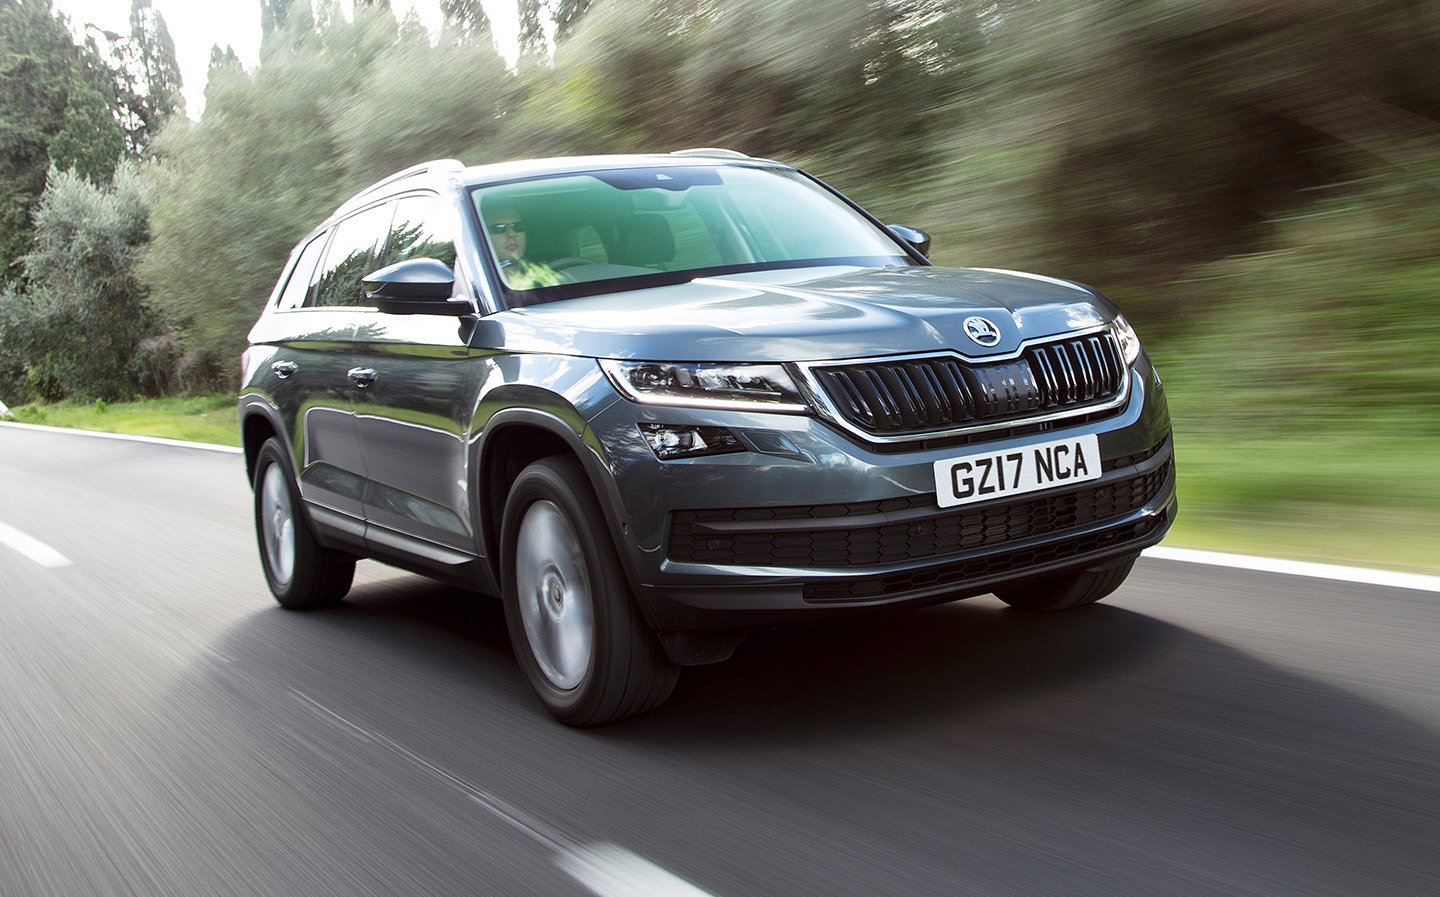 The Motor Awards 2018: Vote for your best sports car of the year - Skoda Kodiaq